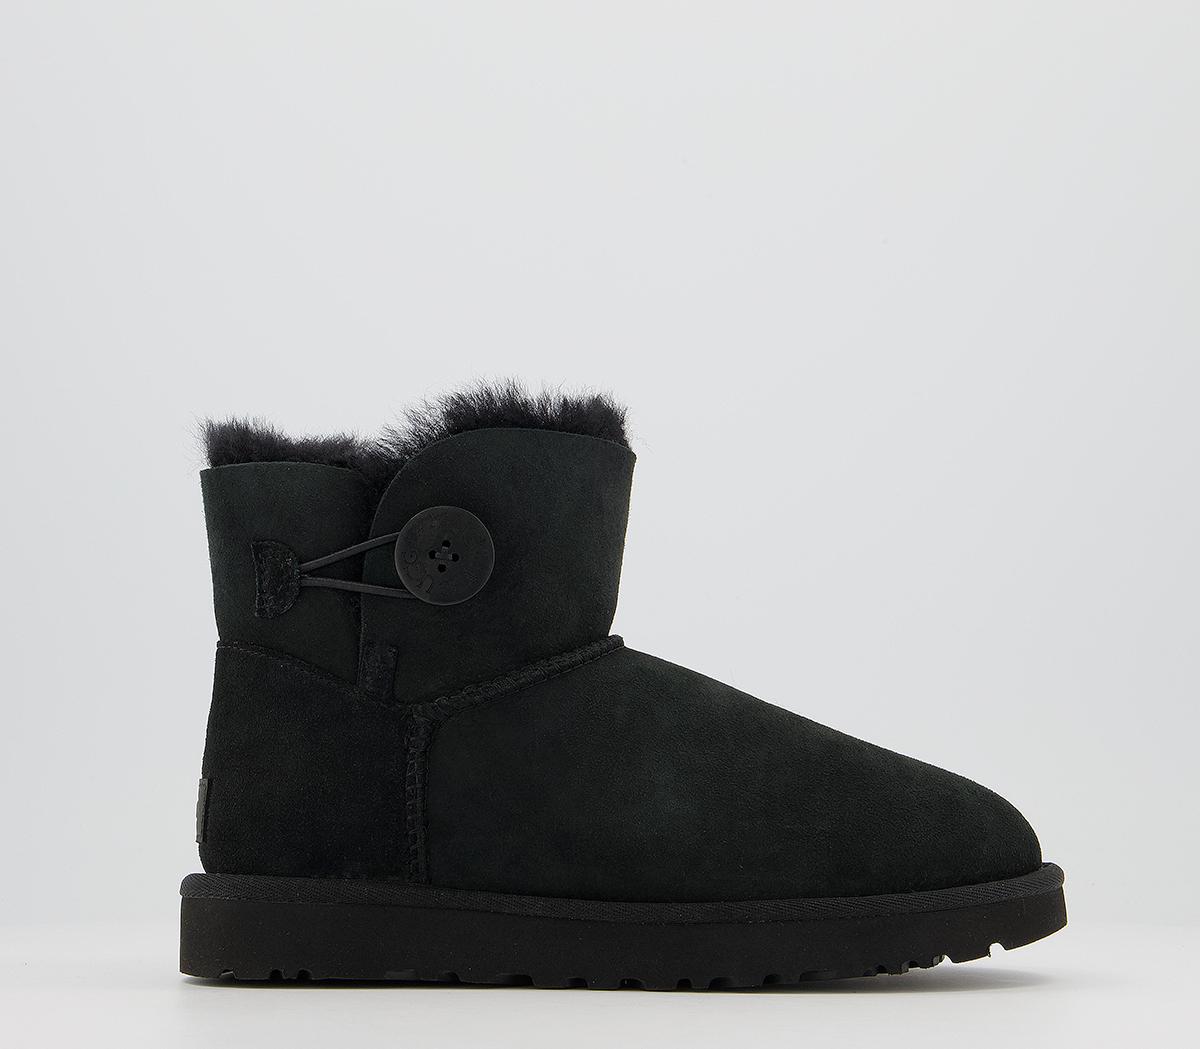 UGG Mini Bailey Button II Boots Black Suede - Women's Ankle Boots